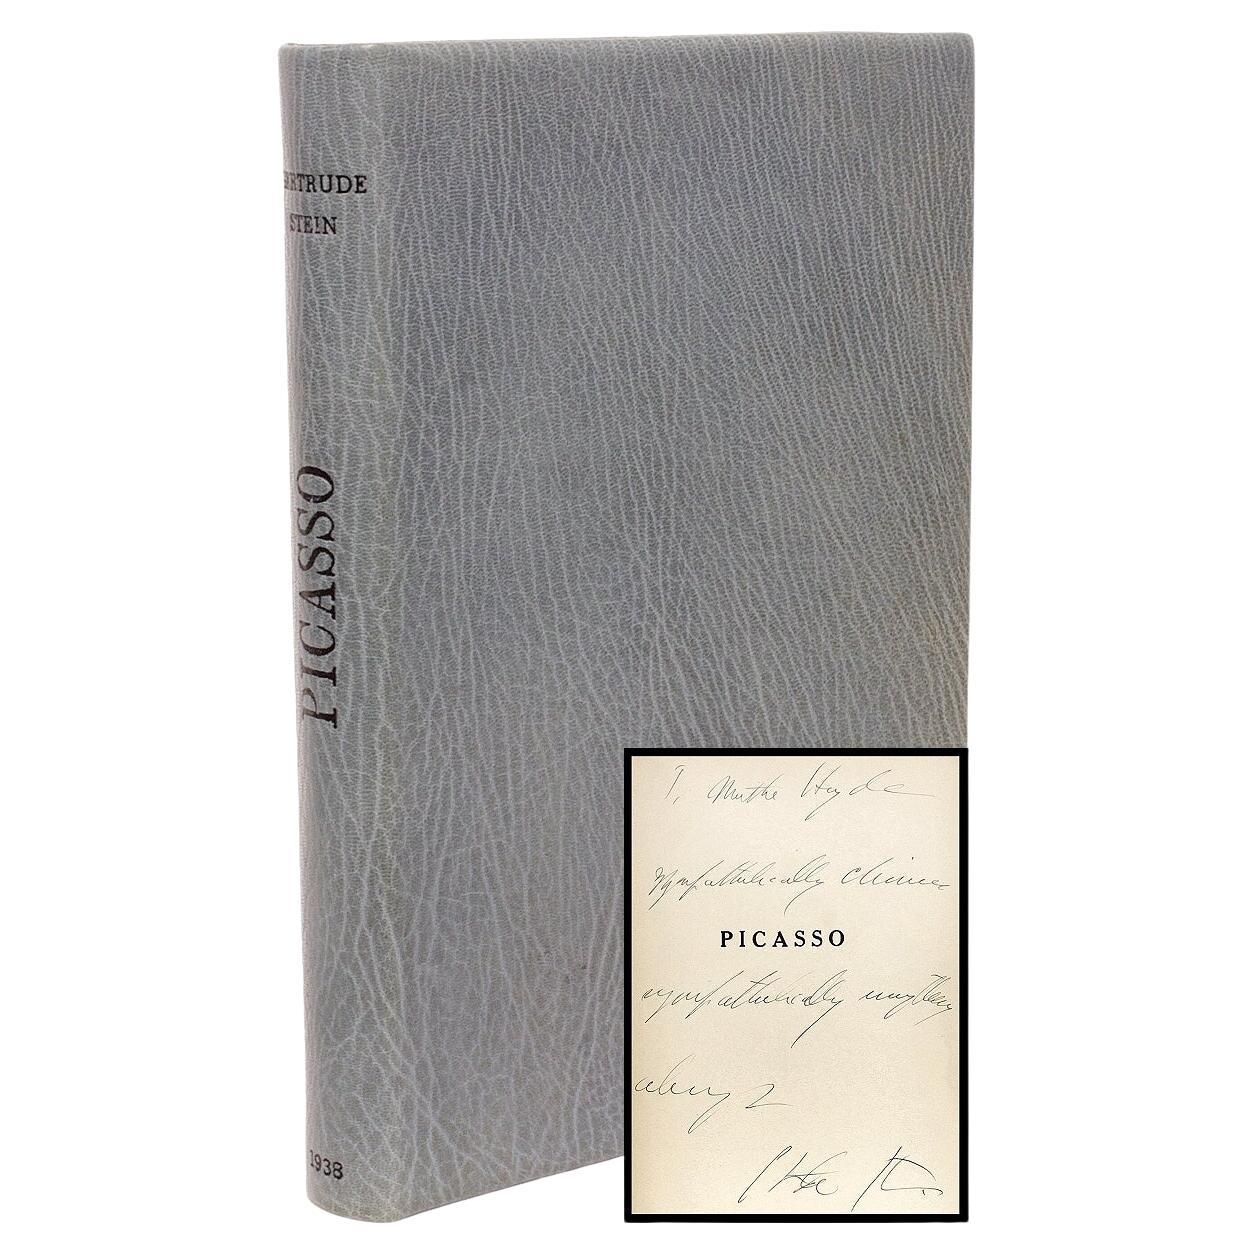 Gertrude Stein Anciens et Modernes Picasso, First Edition Presentation Copy 1938 For Sale